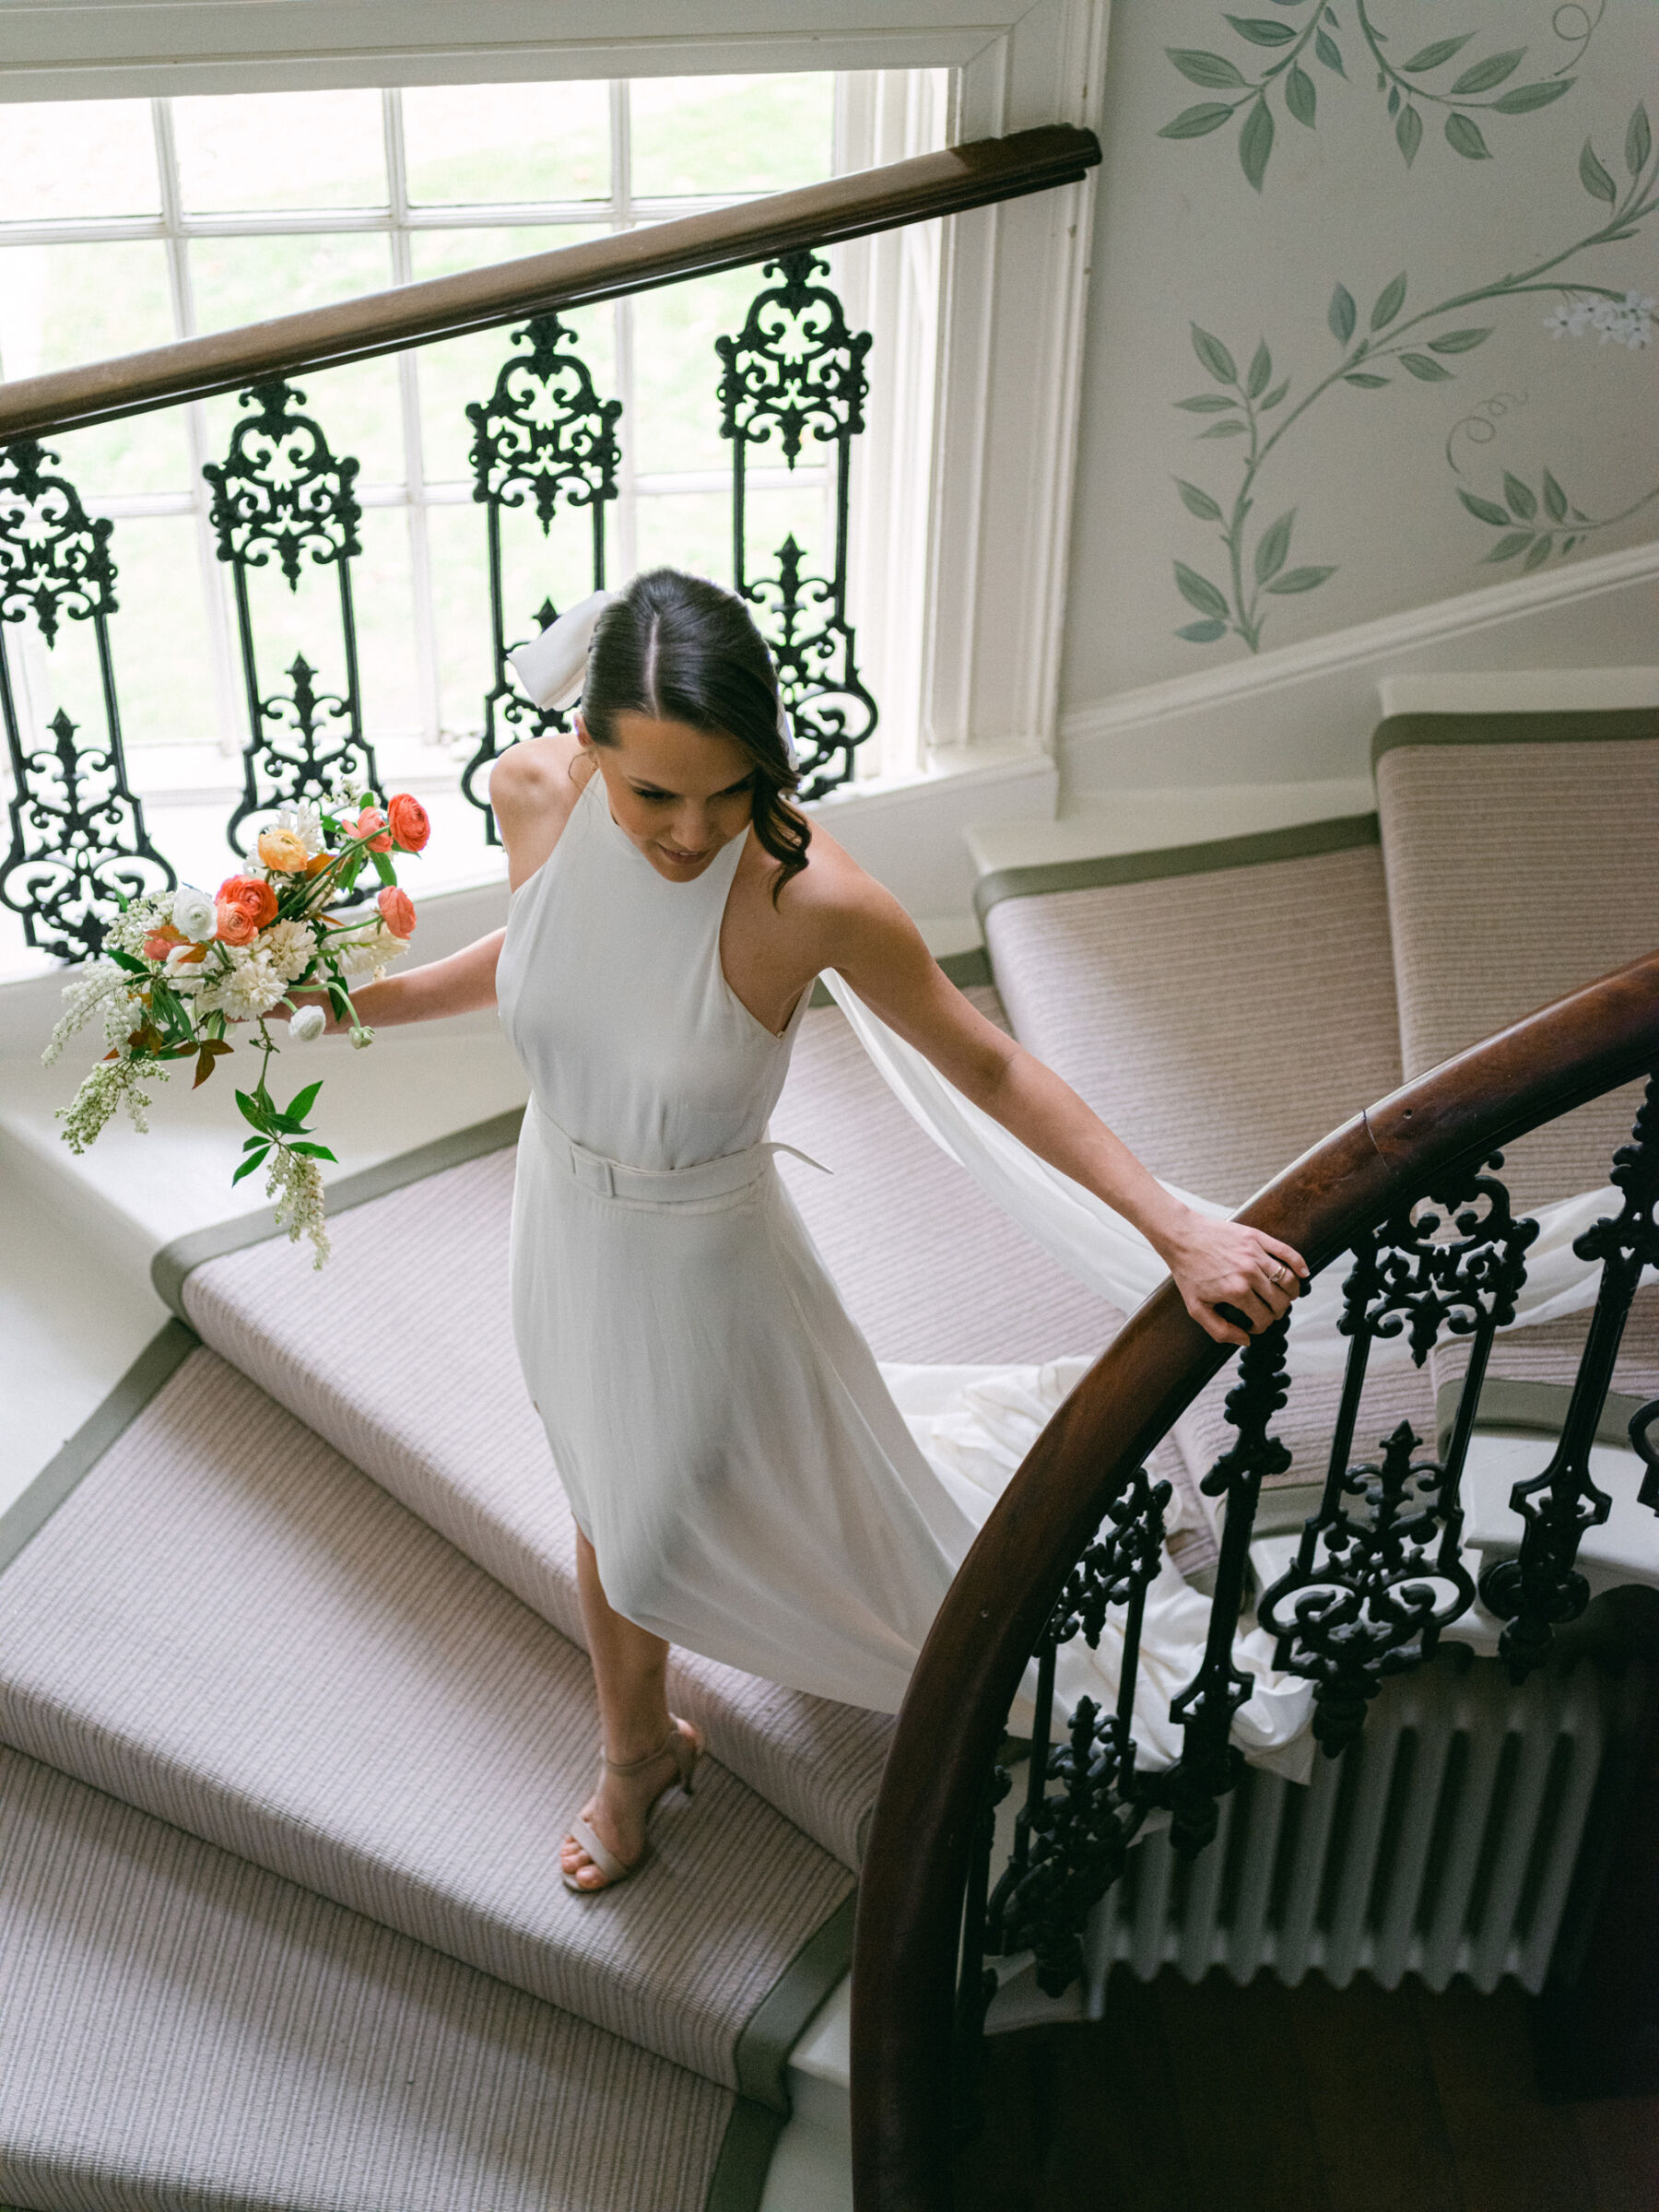 Bride descending down the staircase at Findon Place wearing an elegant halterneck wedding dress and bow-veil.